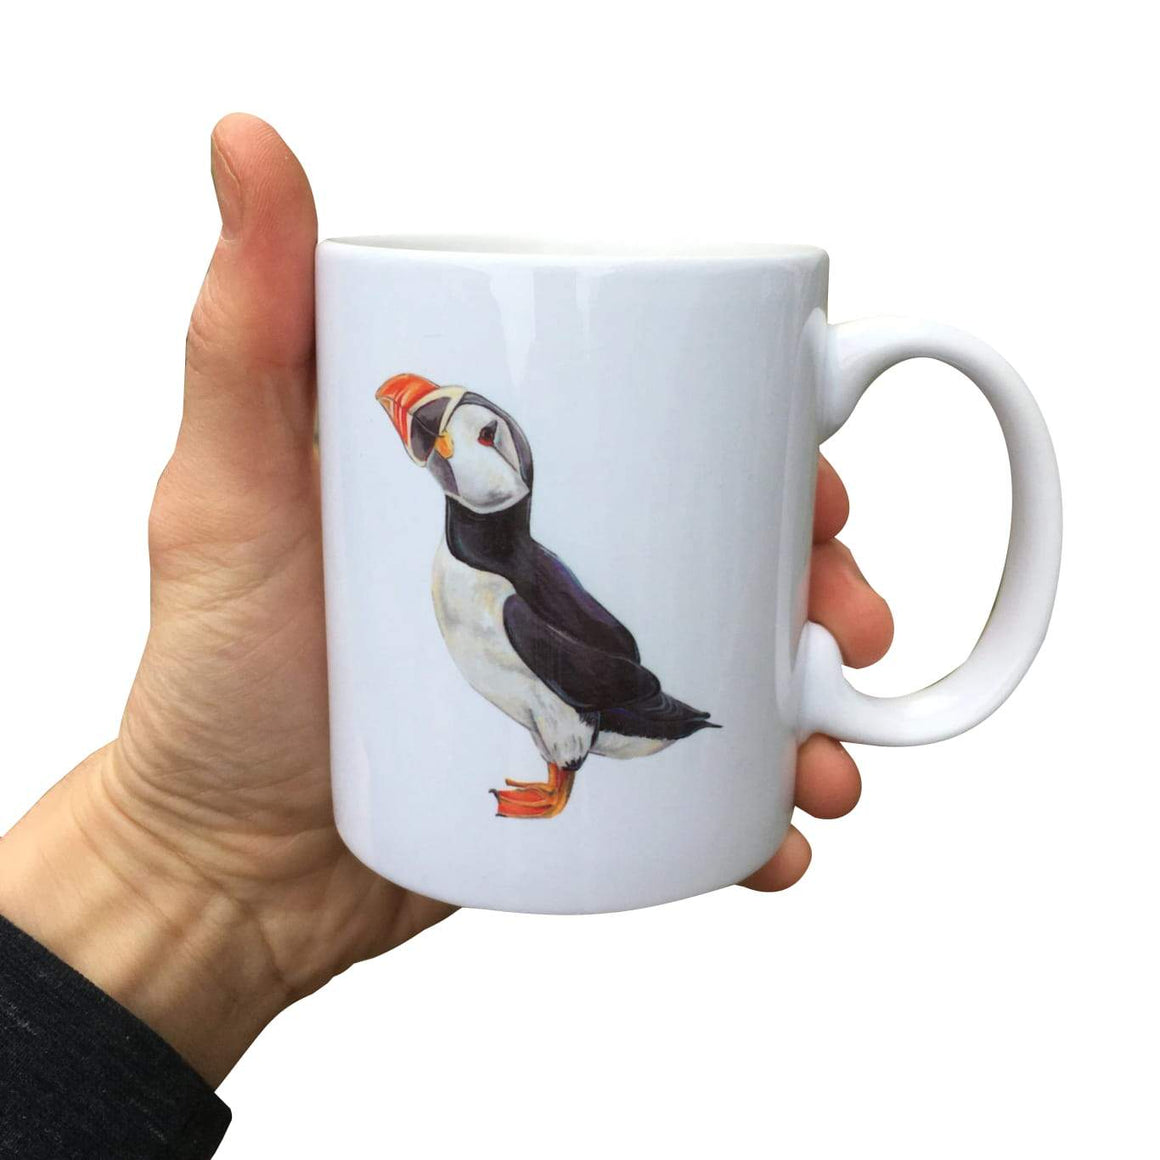 Painted Puffin Mug (Can be personalised)